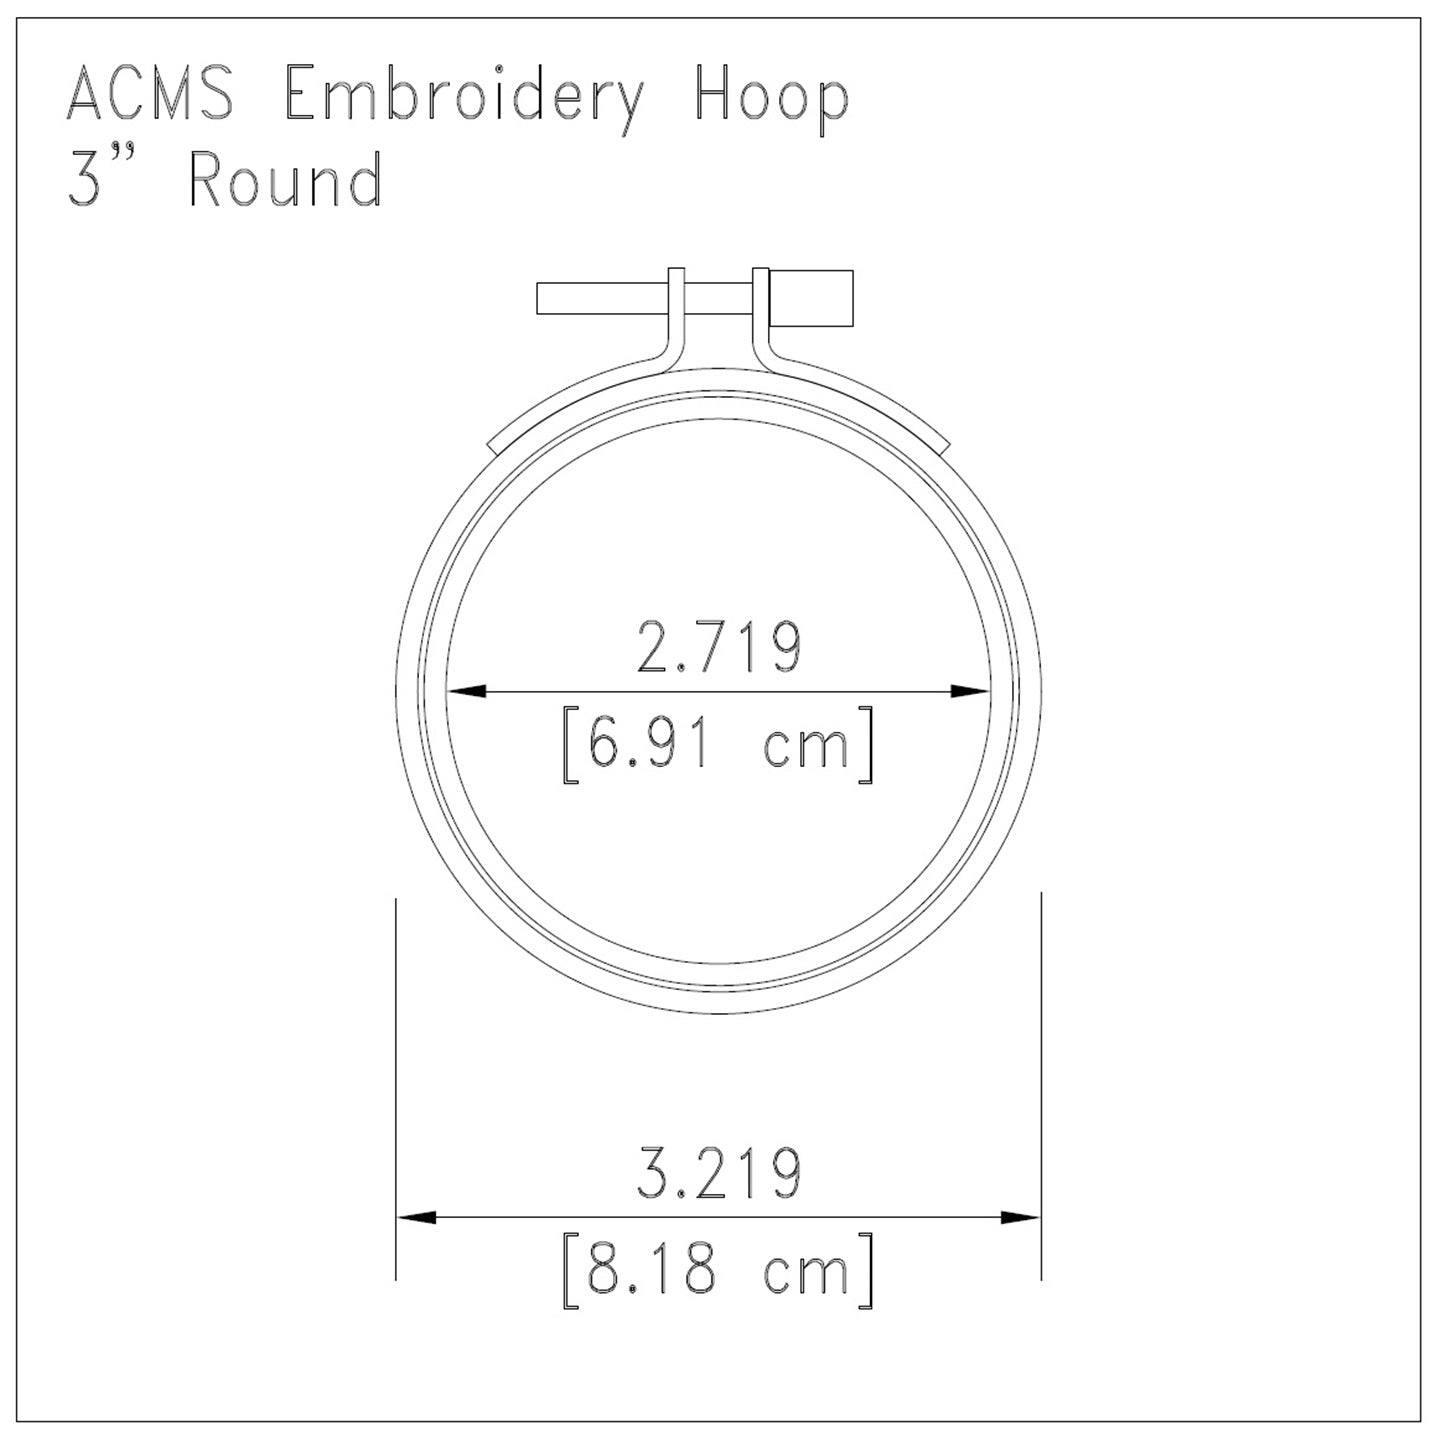 3" Round Embroidery Hoops